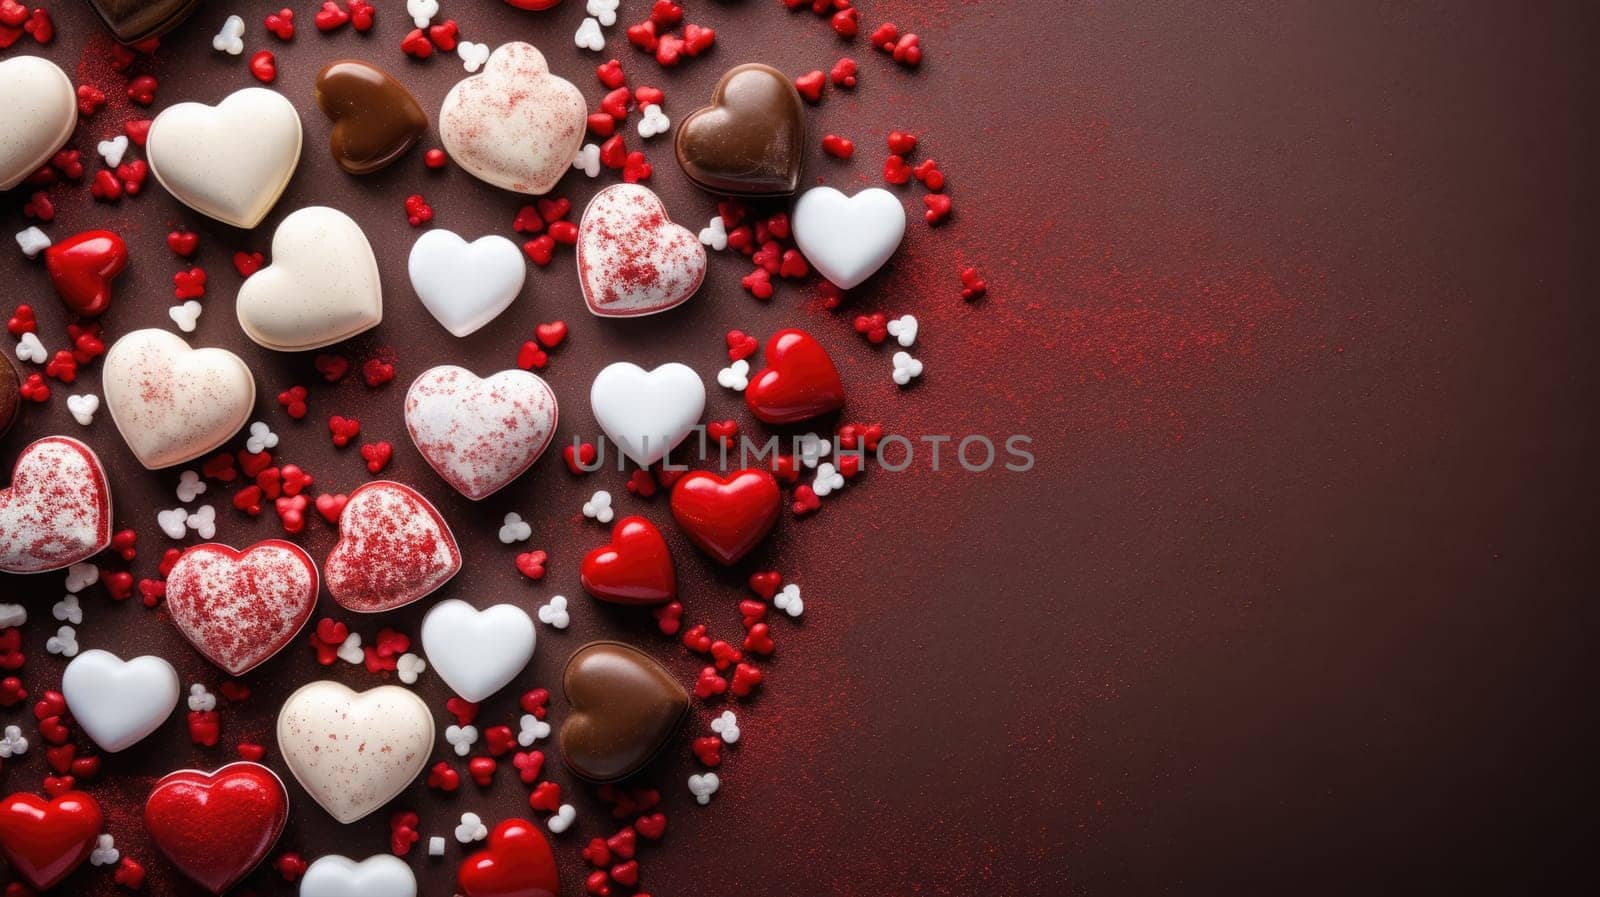 Valentines day heart shaped sweets on red background. Top view with copy space. by JuliaDorian